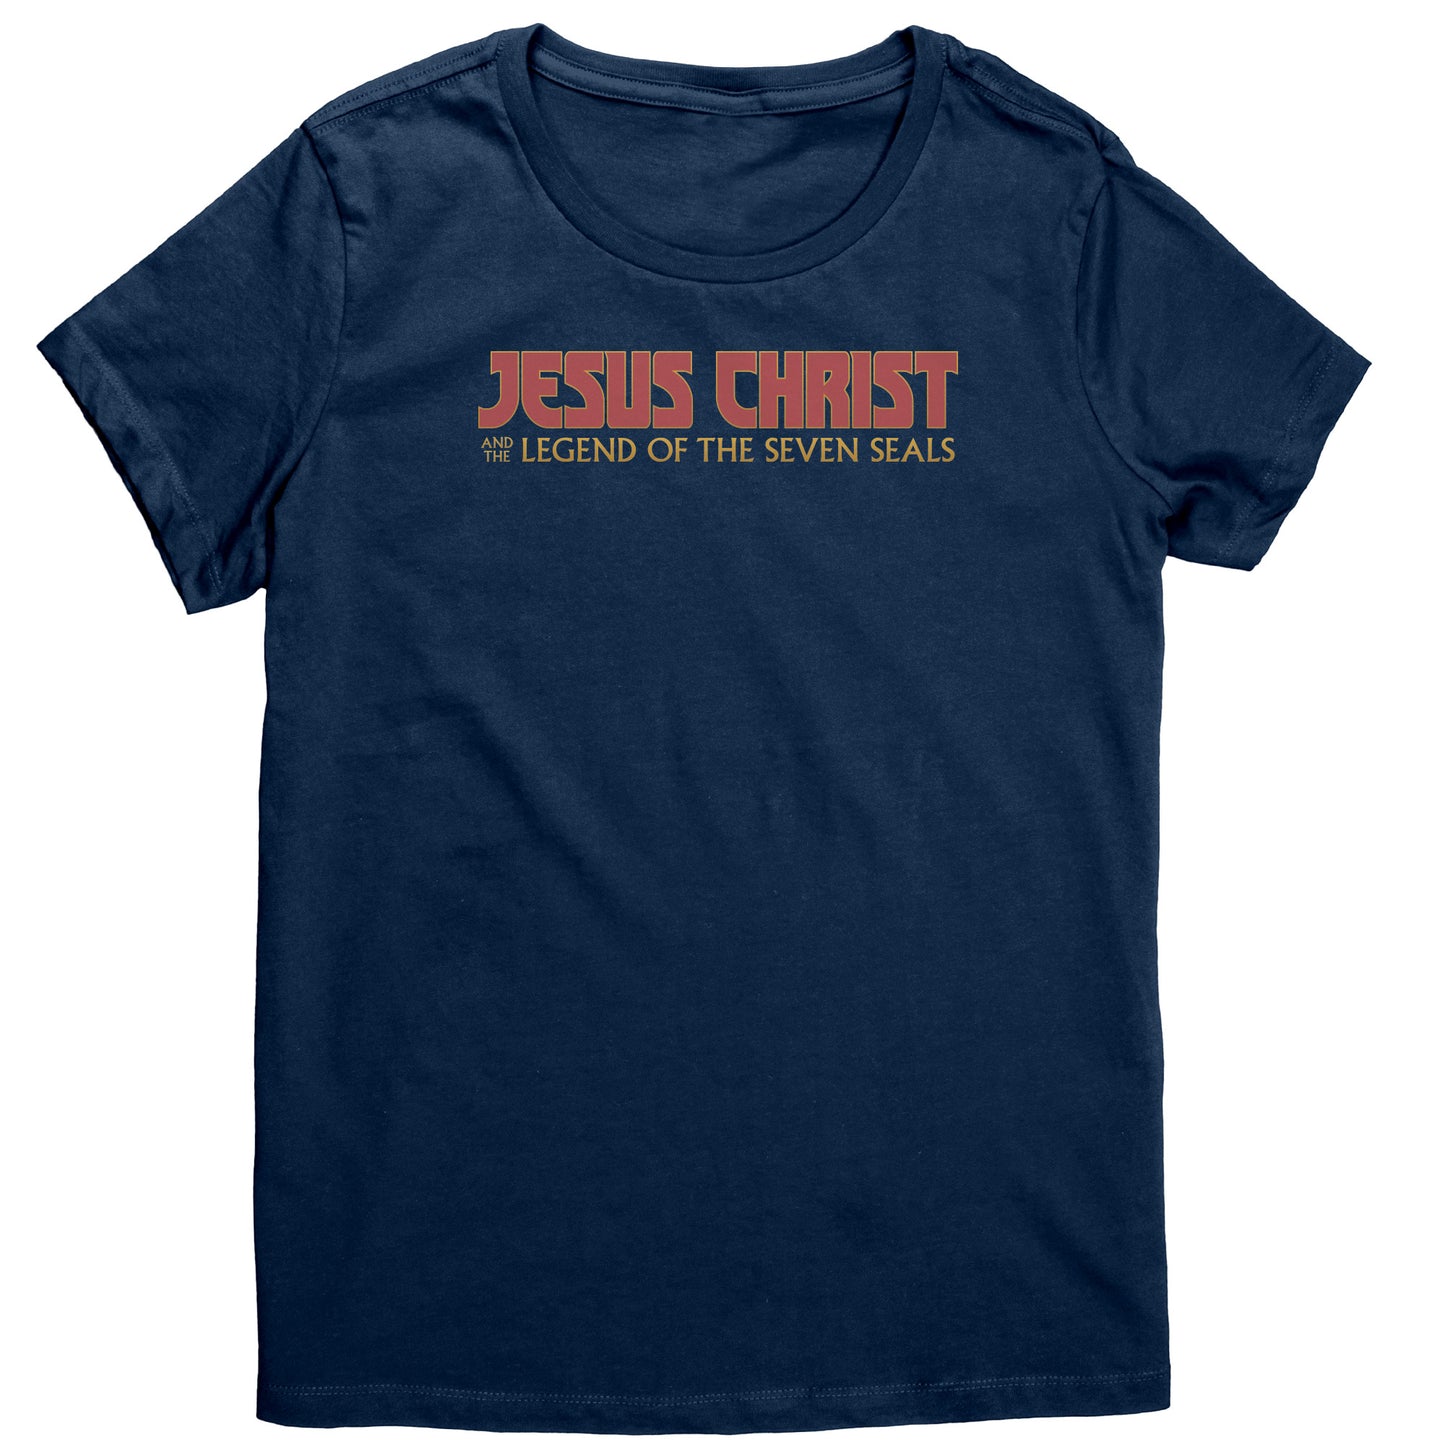 Jesus Christ and the Legend of the Seven Seals Women's T-Shirt